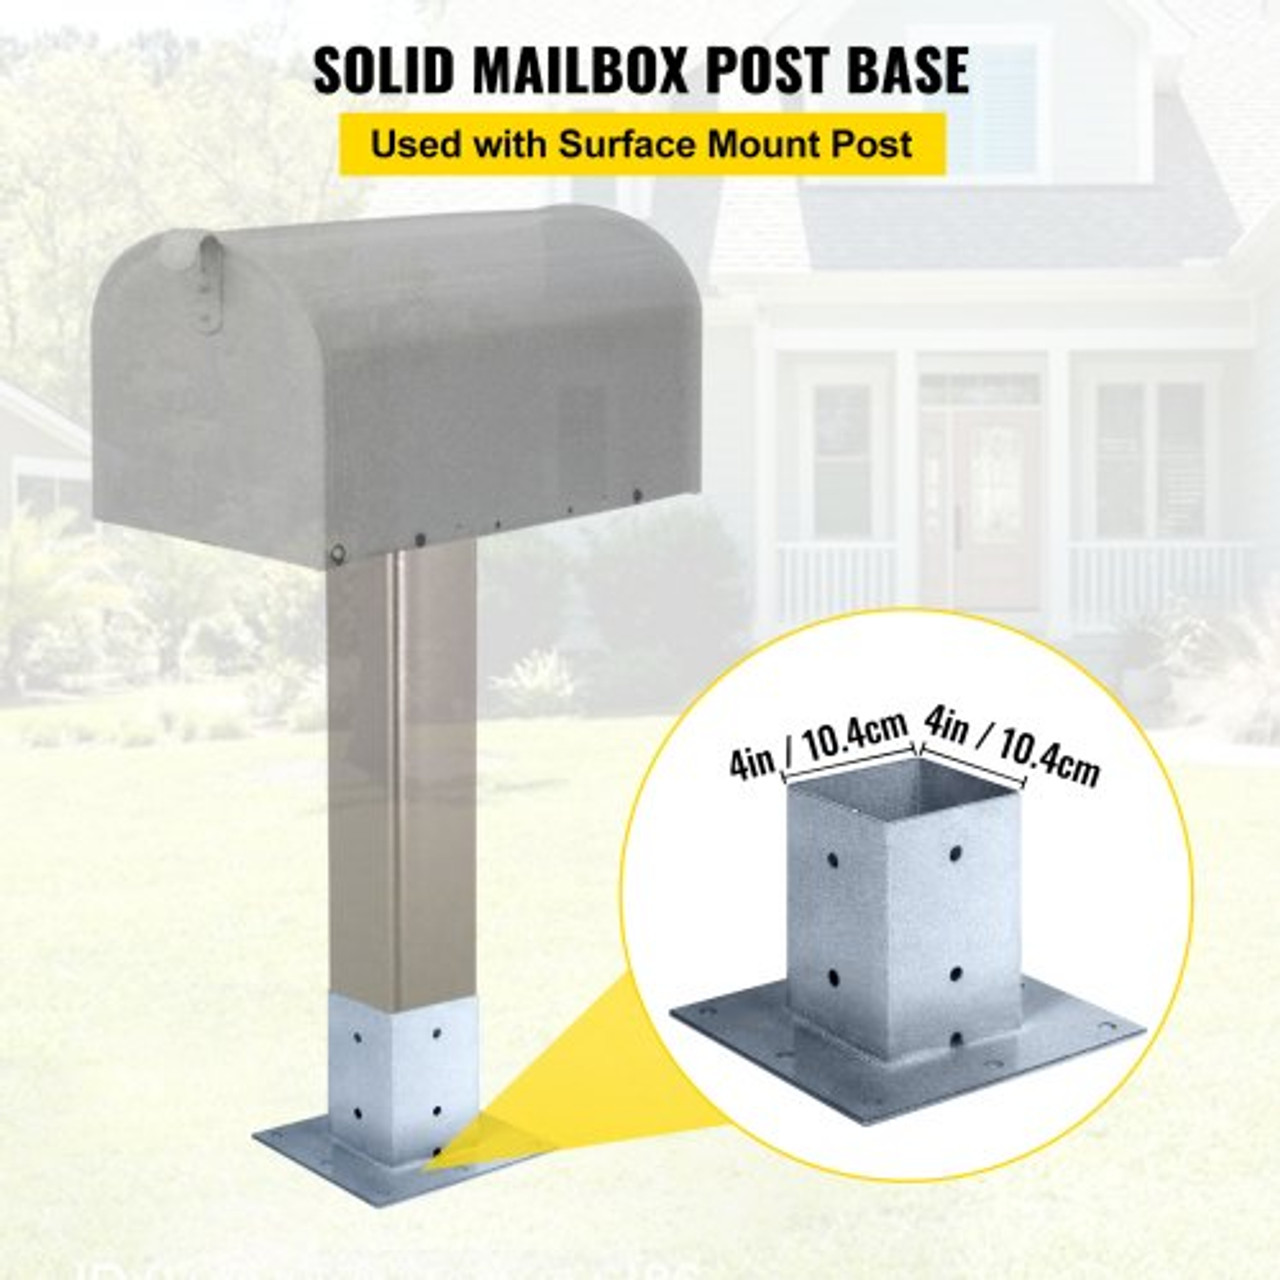 Post Base, 4"x4" Mailbox Base Plate, Granite Powder-Coated Fence Post Anchor, Q235 Steel Deck Post Base, Surface Mount Base Plate for Mailbox Post Deck Supports Porch Railing Post Holders